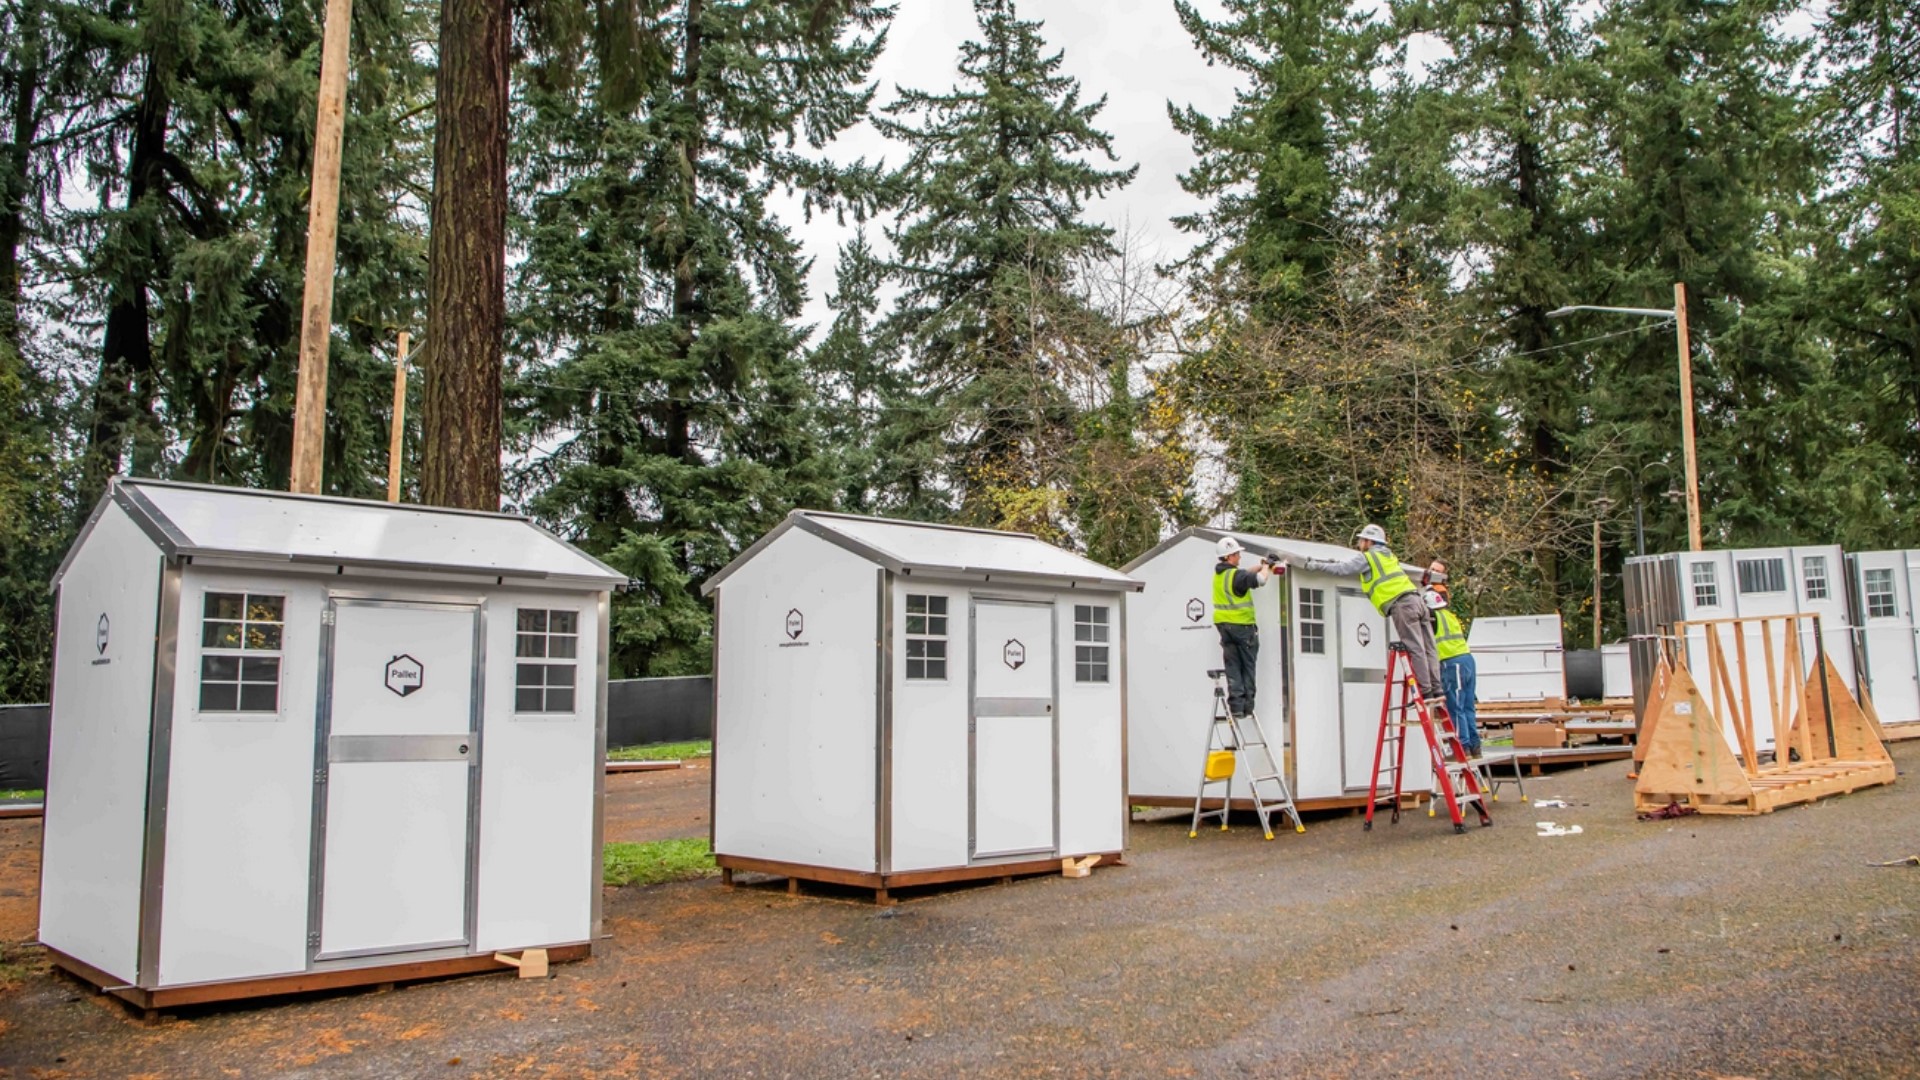 The fourth Safe Stay Community has 20 pod-like structures that can house up to 40 people. It's located on main street.